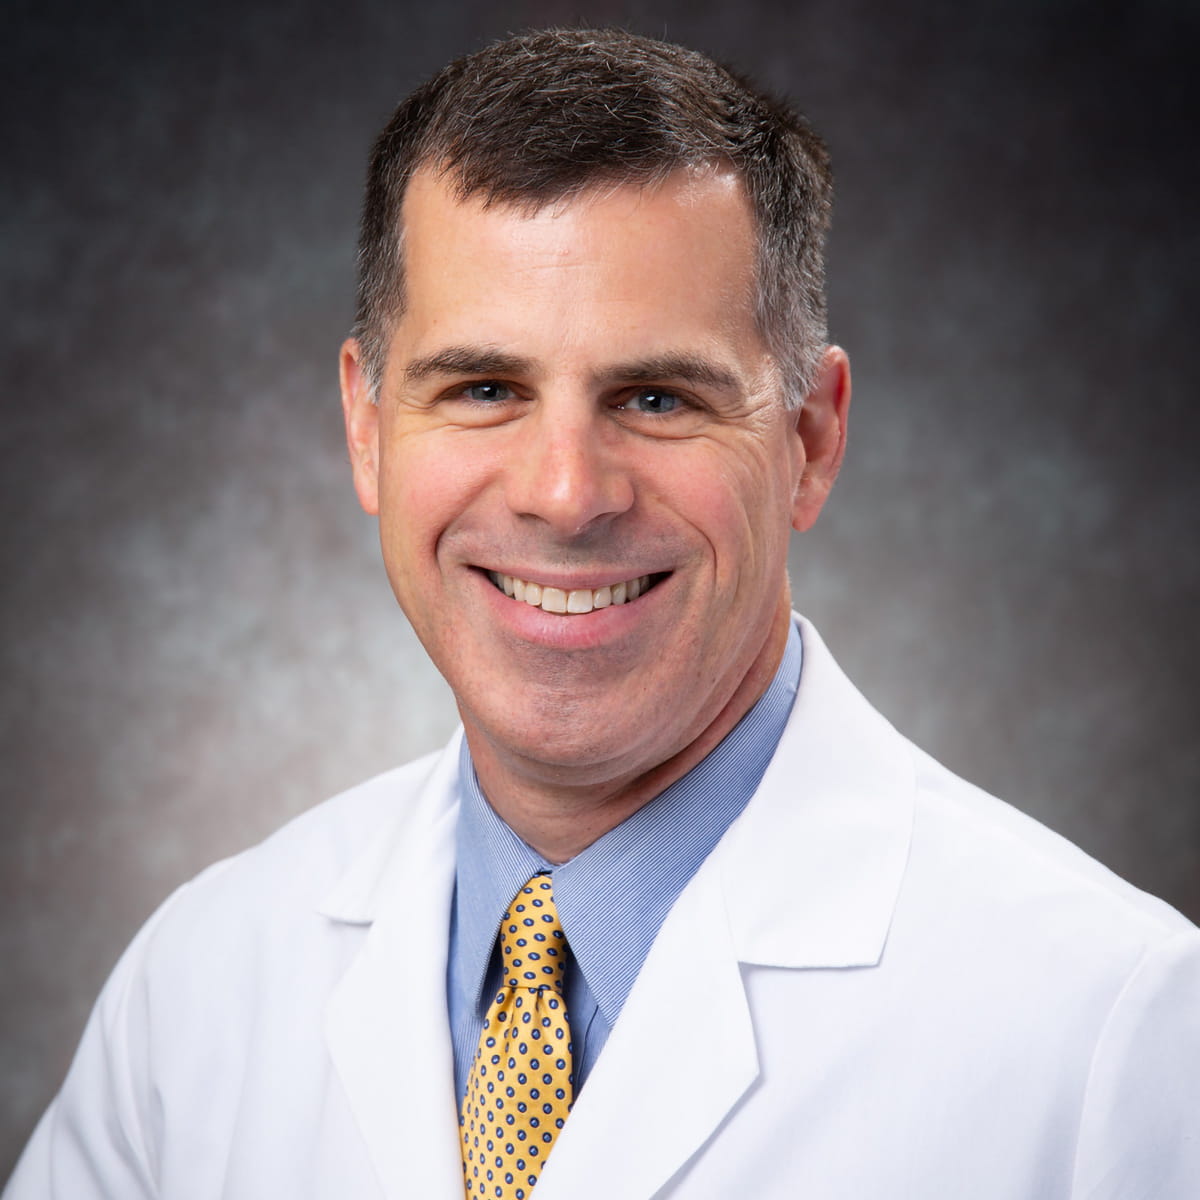 A friendly headshot of Andrew Doyle, MD